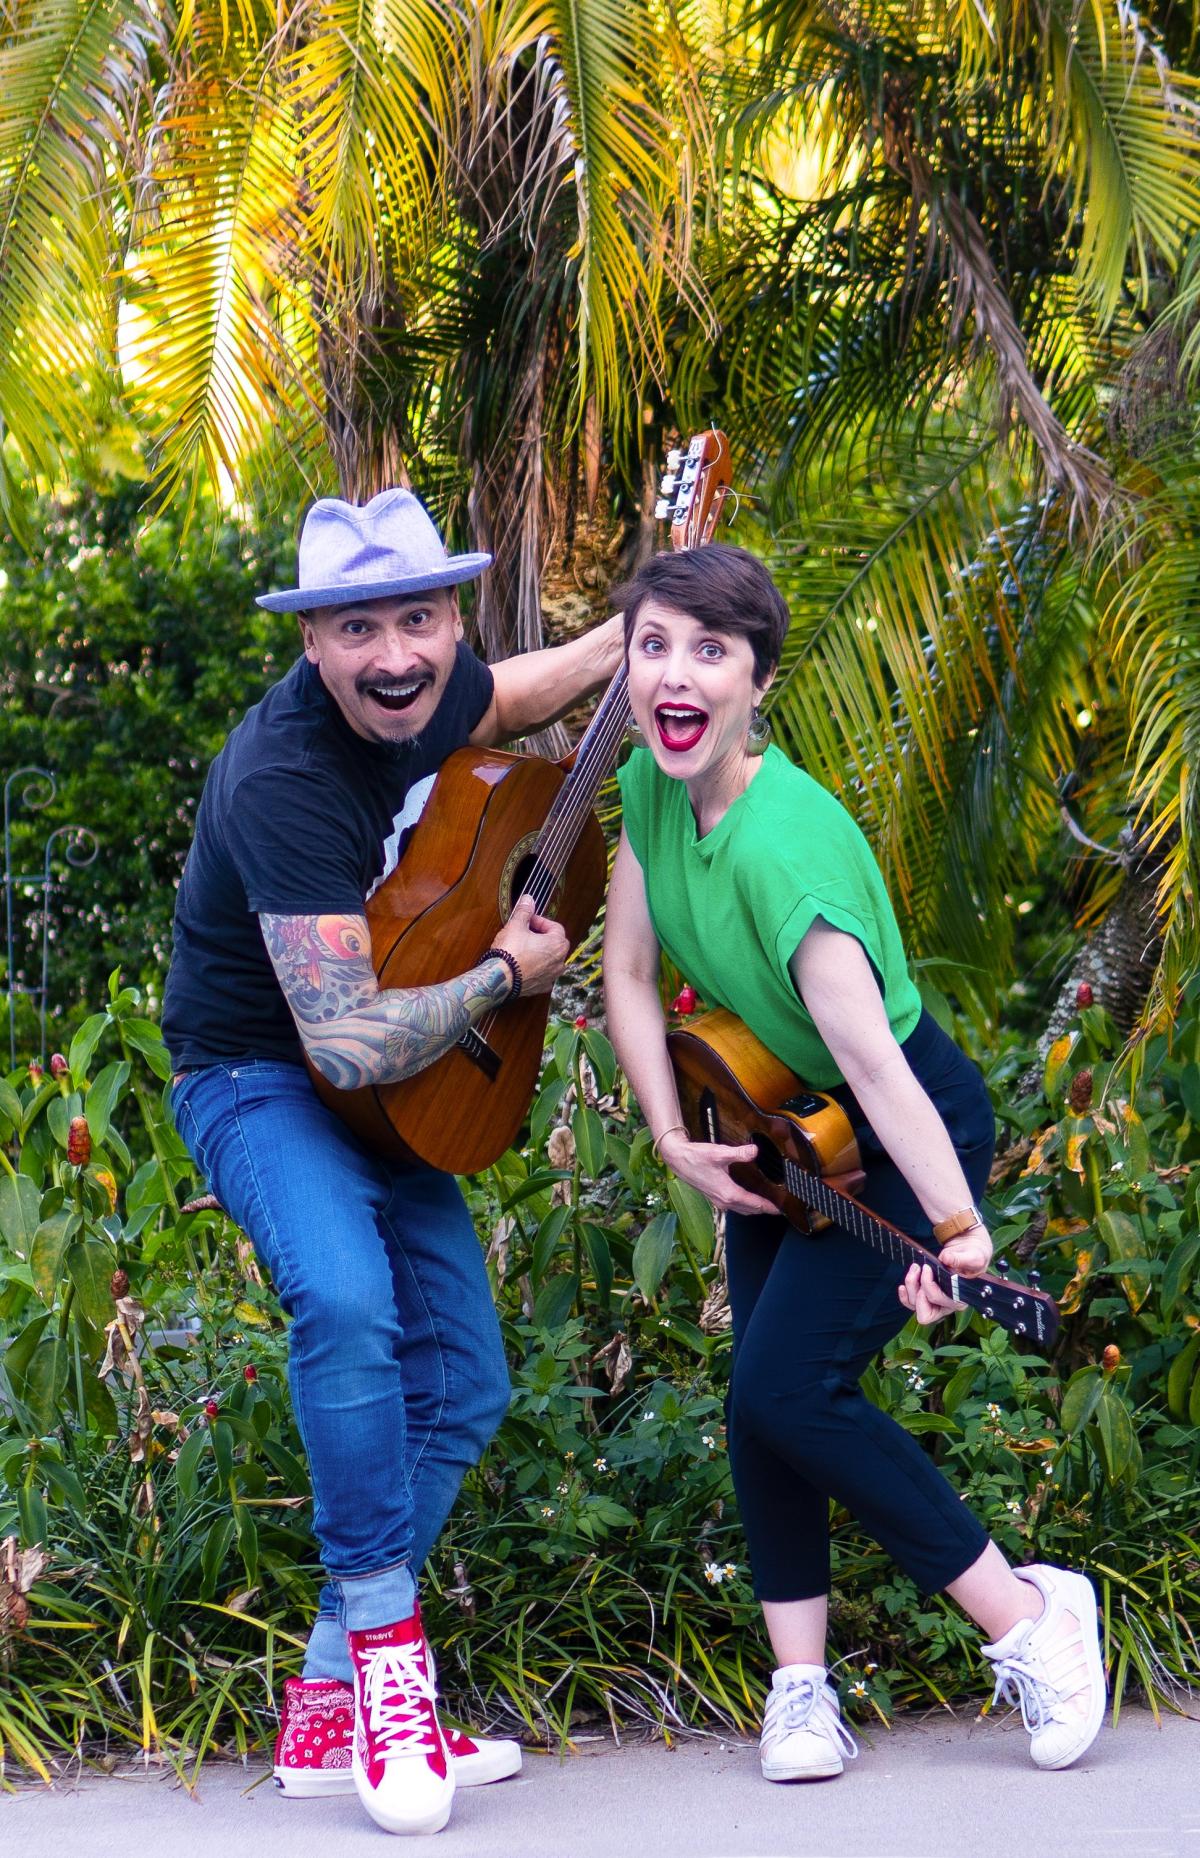 A man holds a guitar and a woman holds a ukelele primed to play.